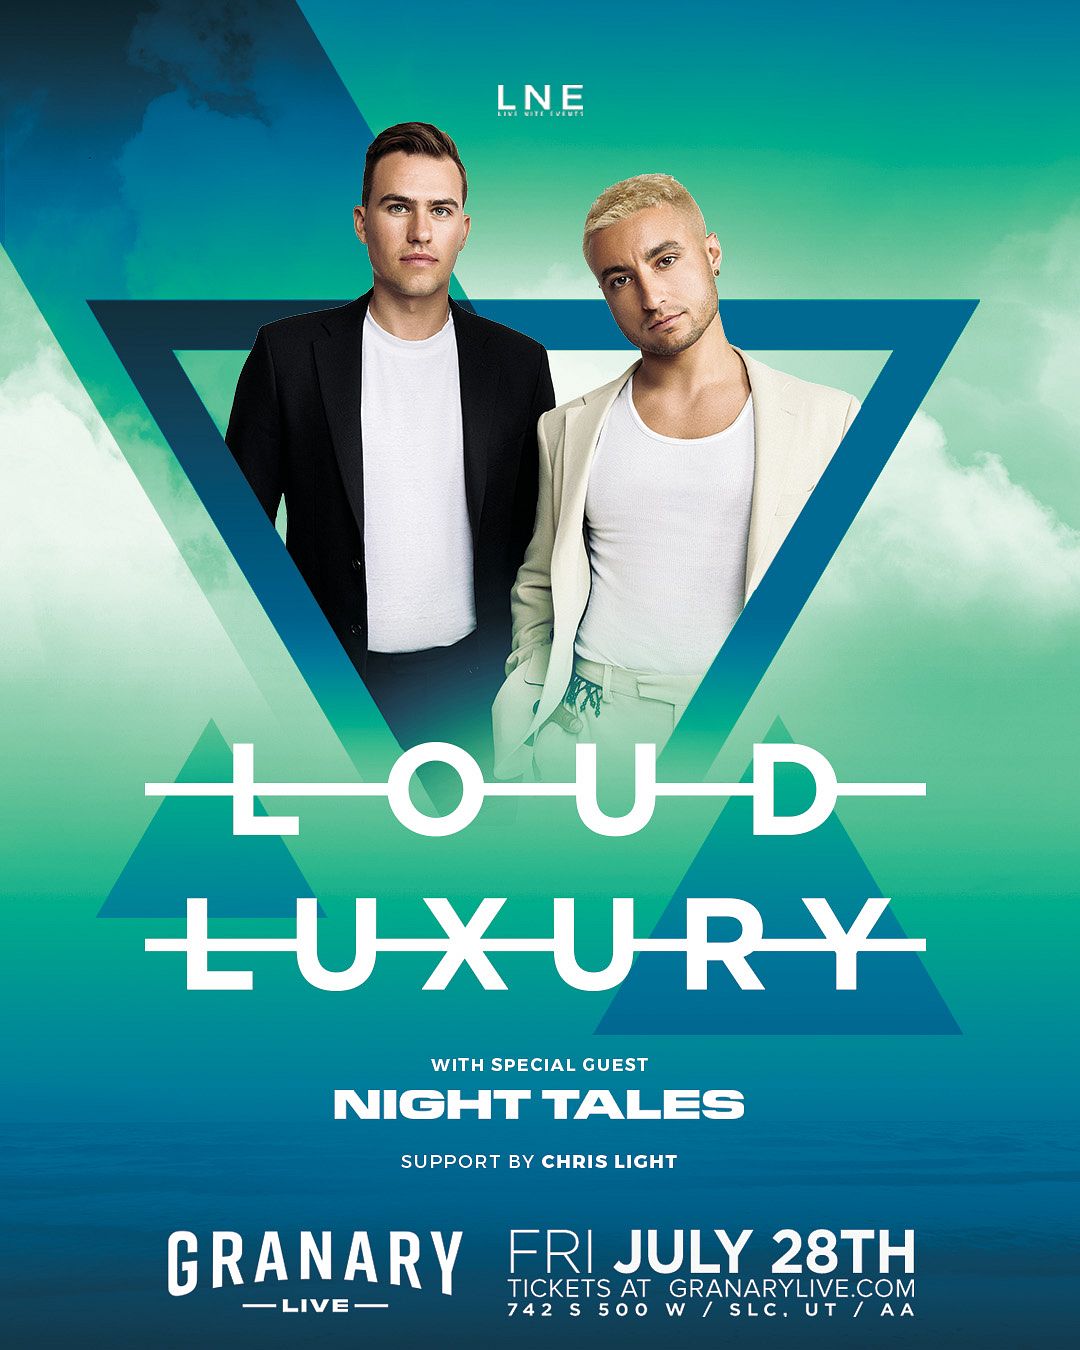 Loud Luxury Concert & Tour History (Updated for 2023 - 2024)